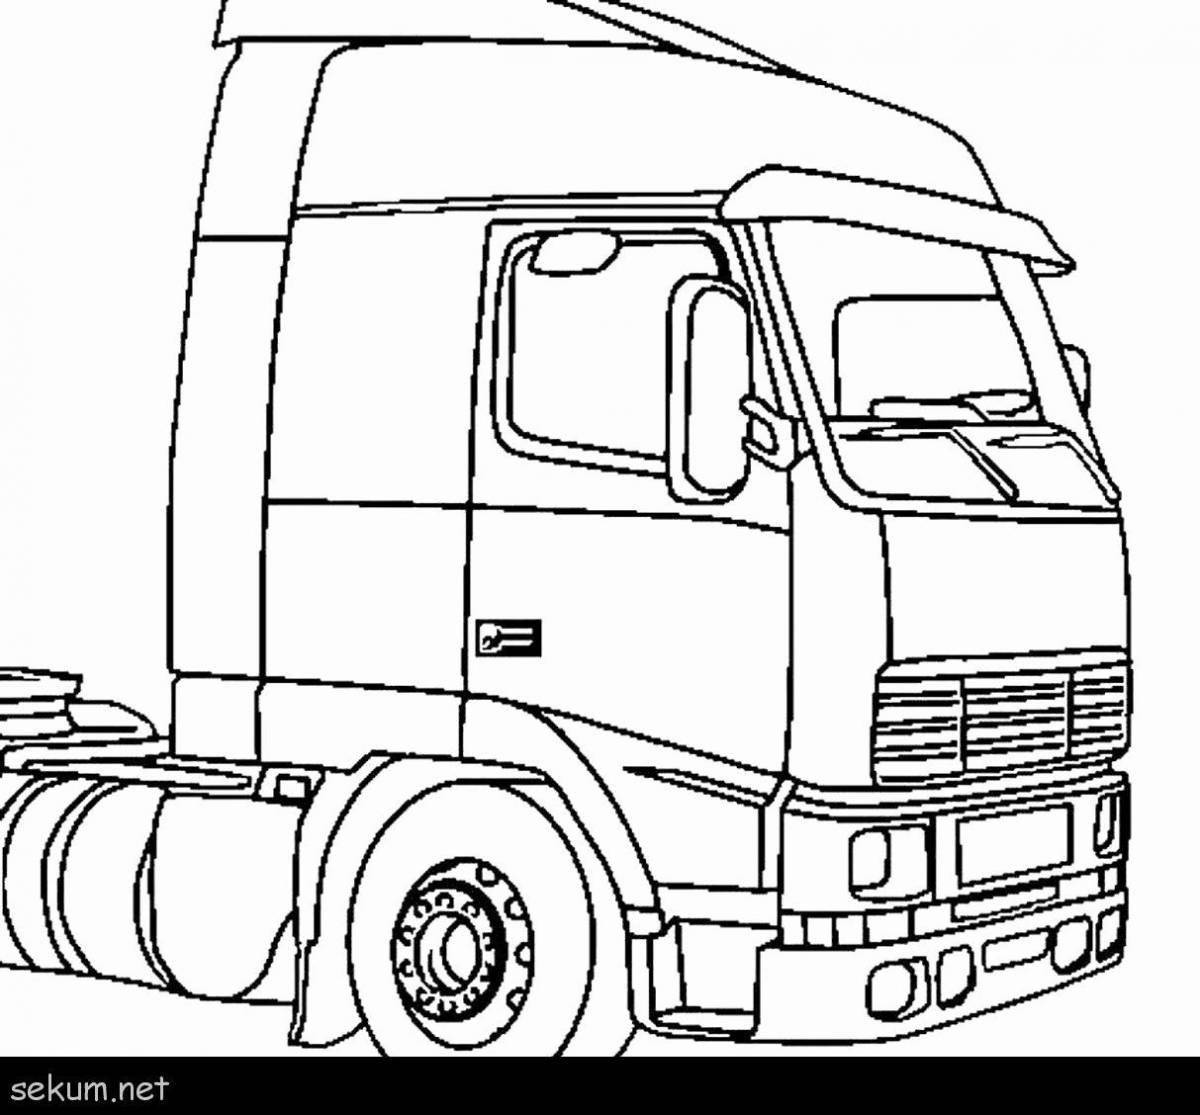 Animated truck coloring page for boys